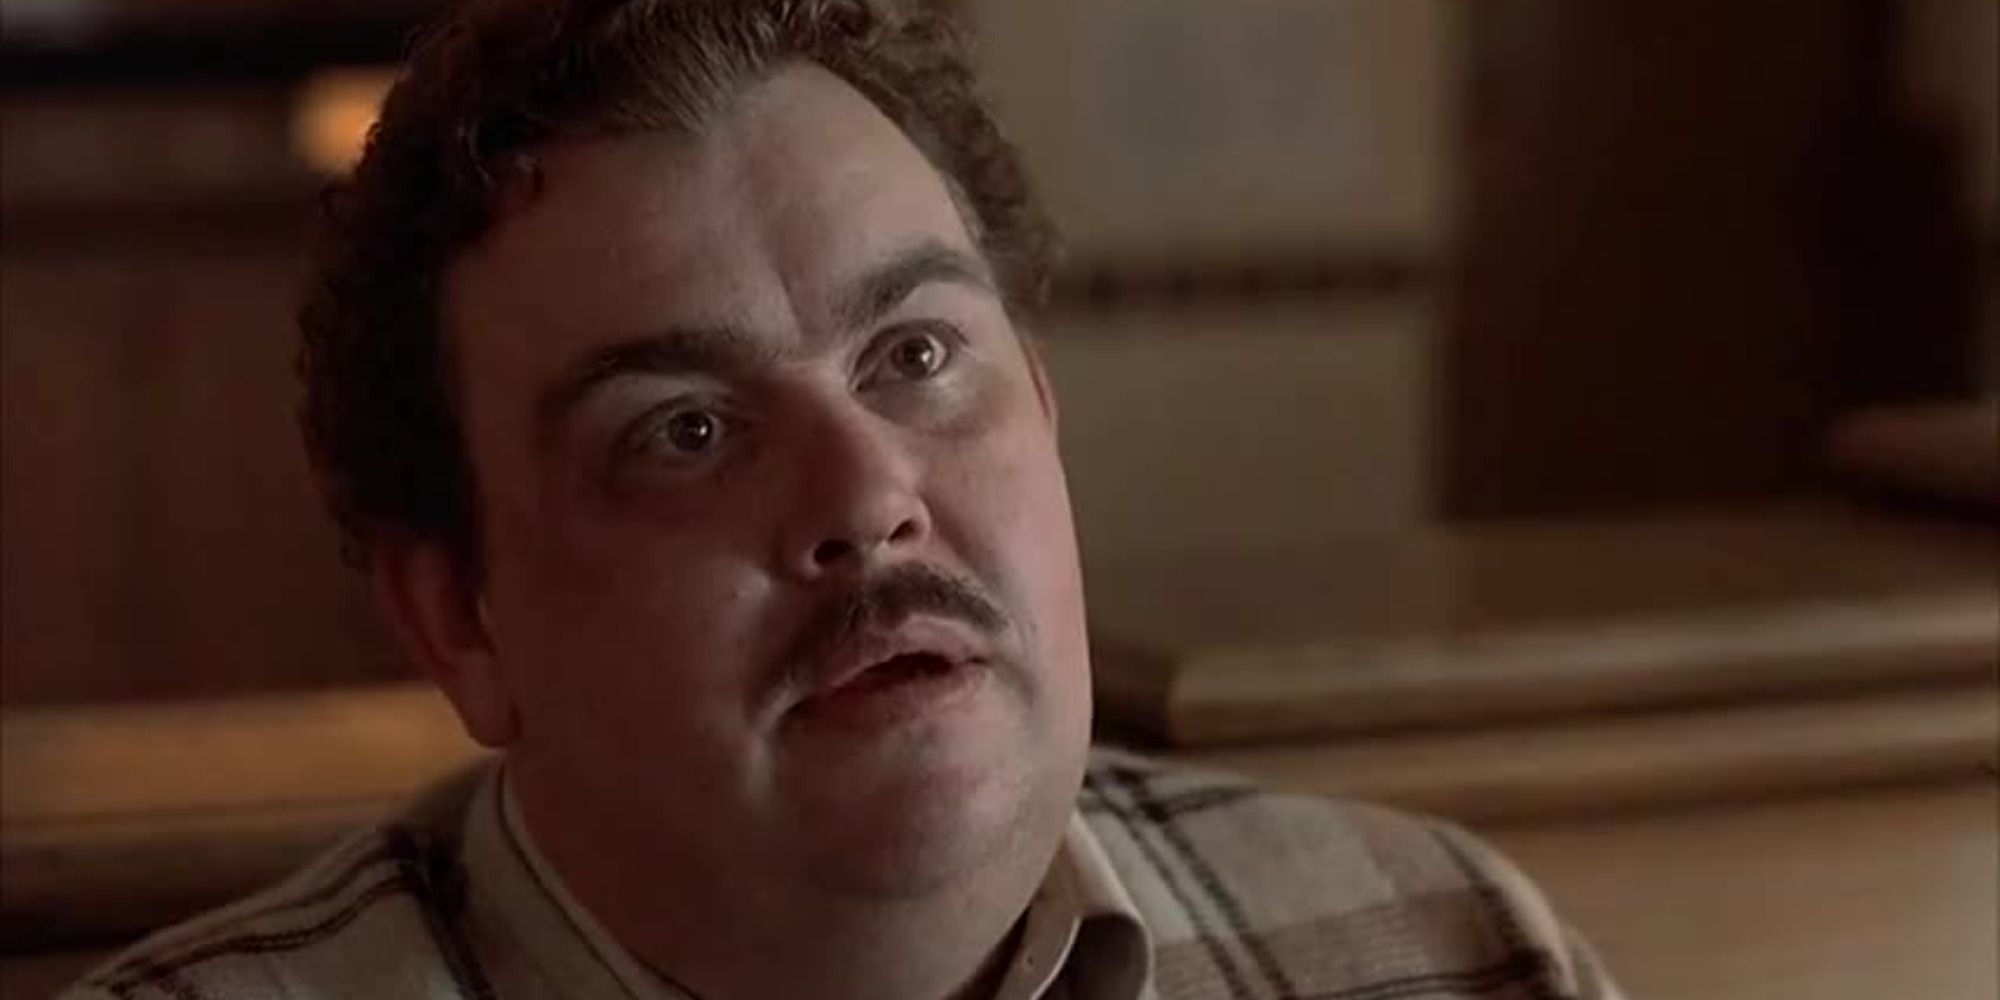 John Candy at the end of Planes, Trains and Automobiles